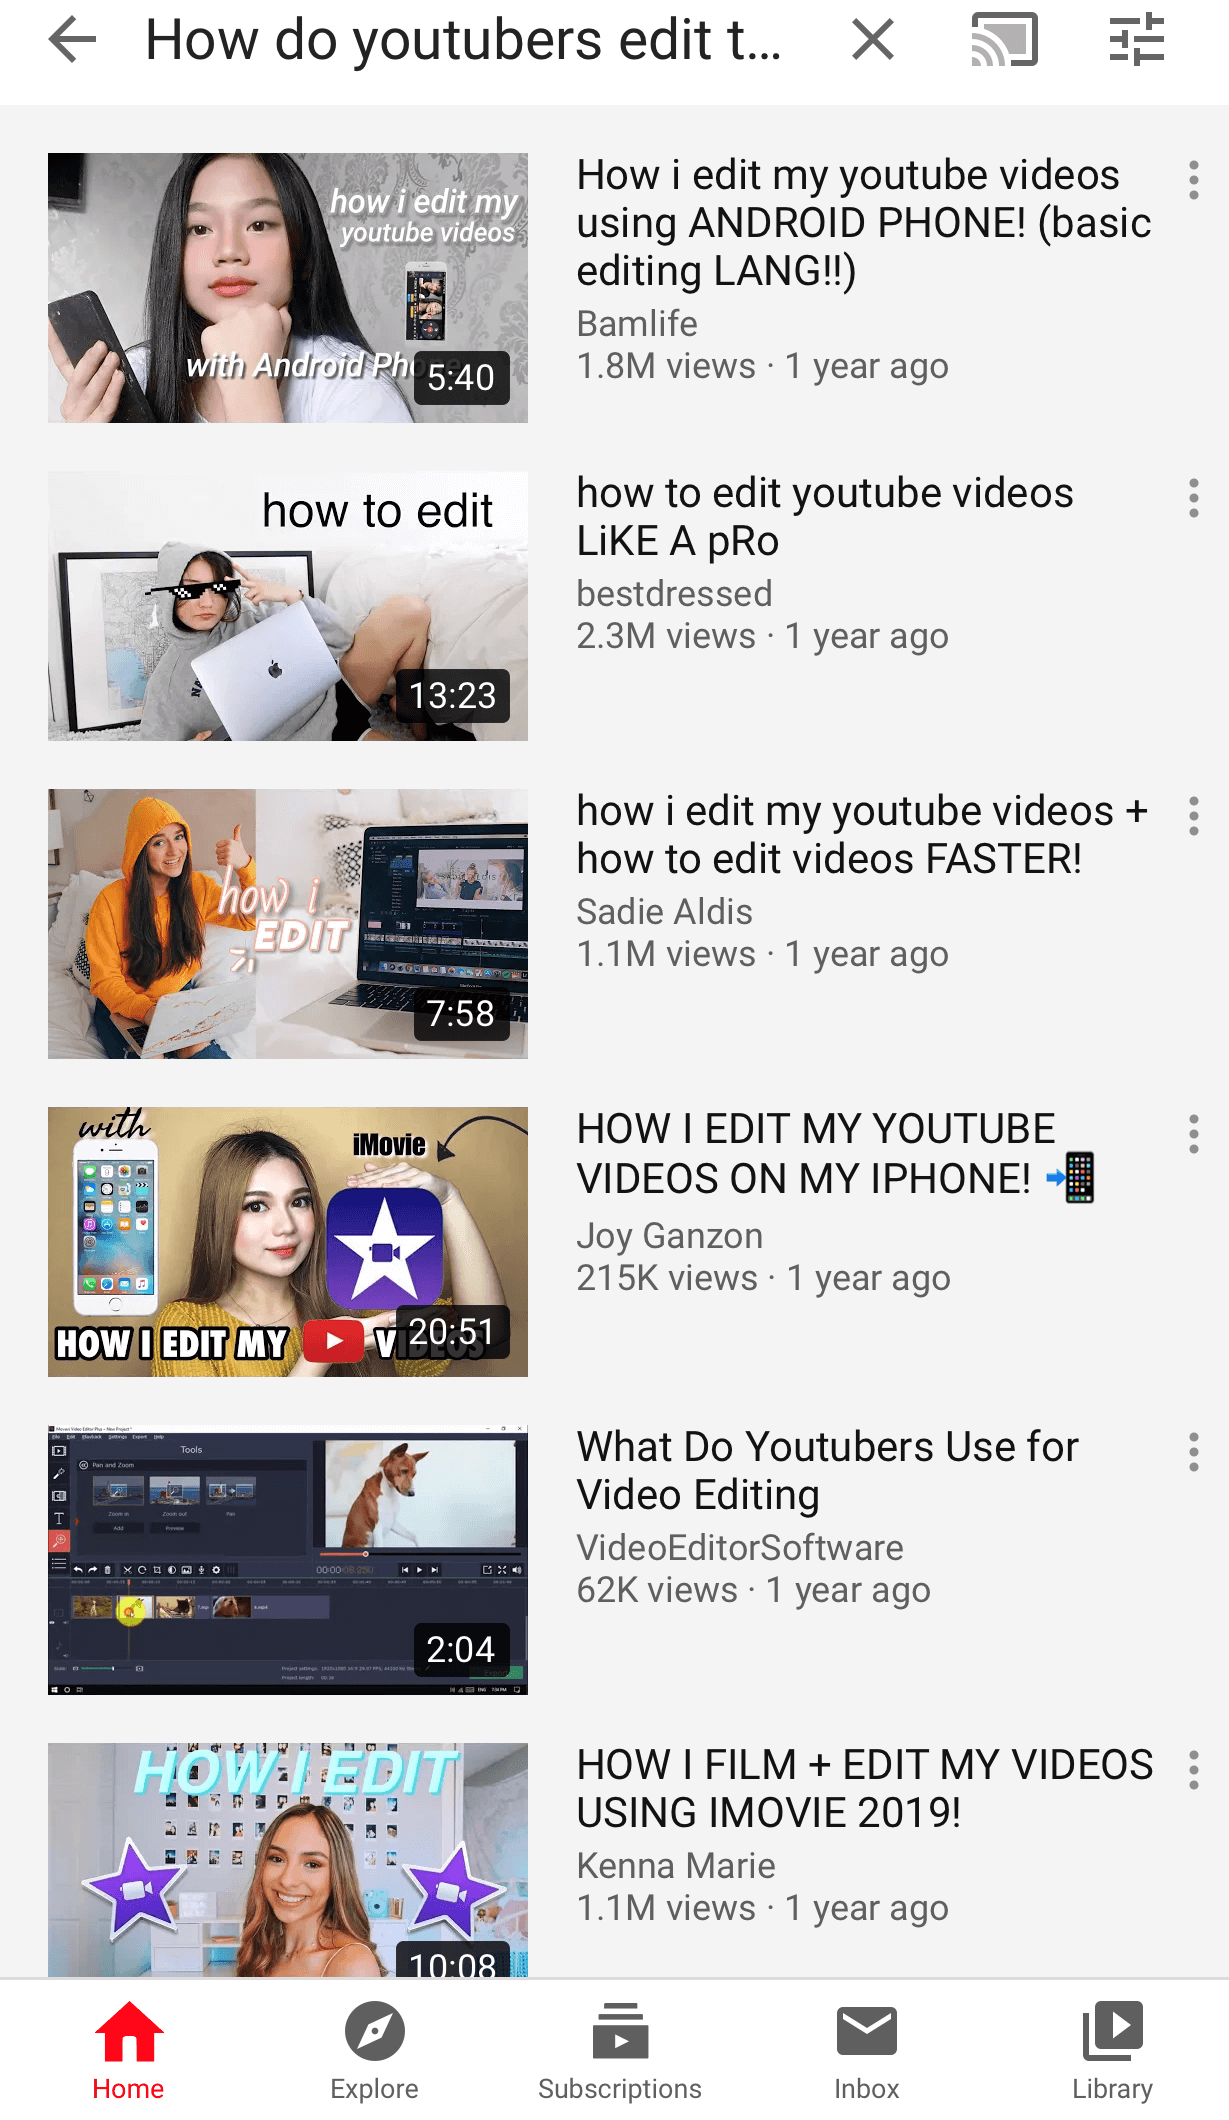 How Do Youtubers Edit Videos